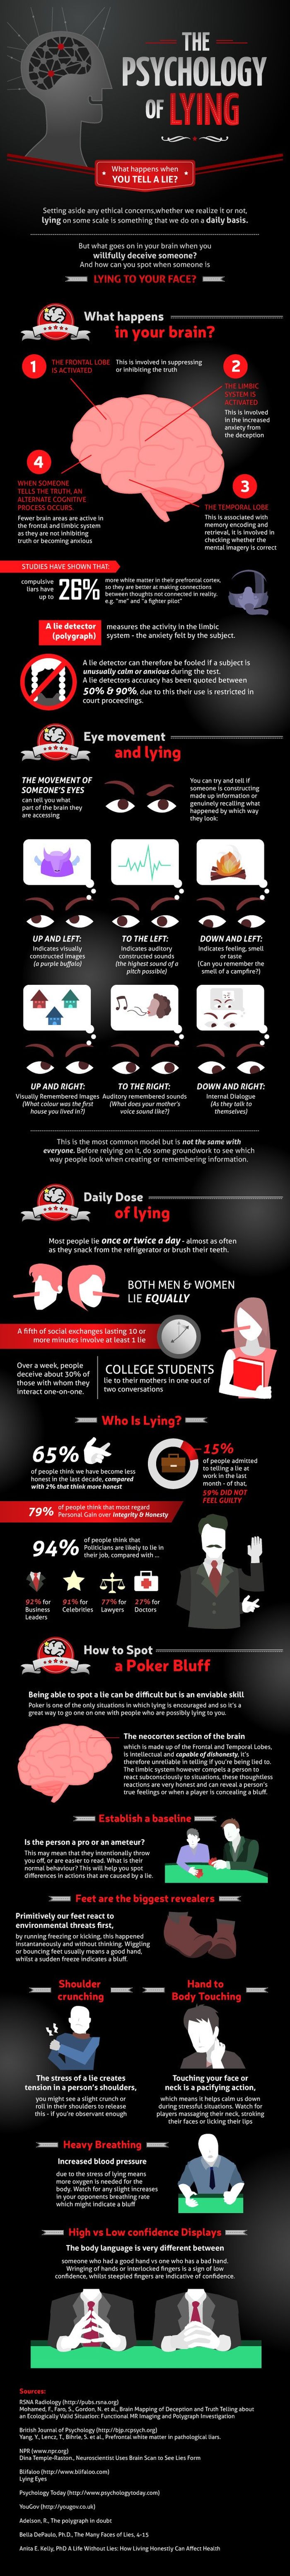 The Psychology of Lying (infographic)